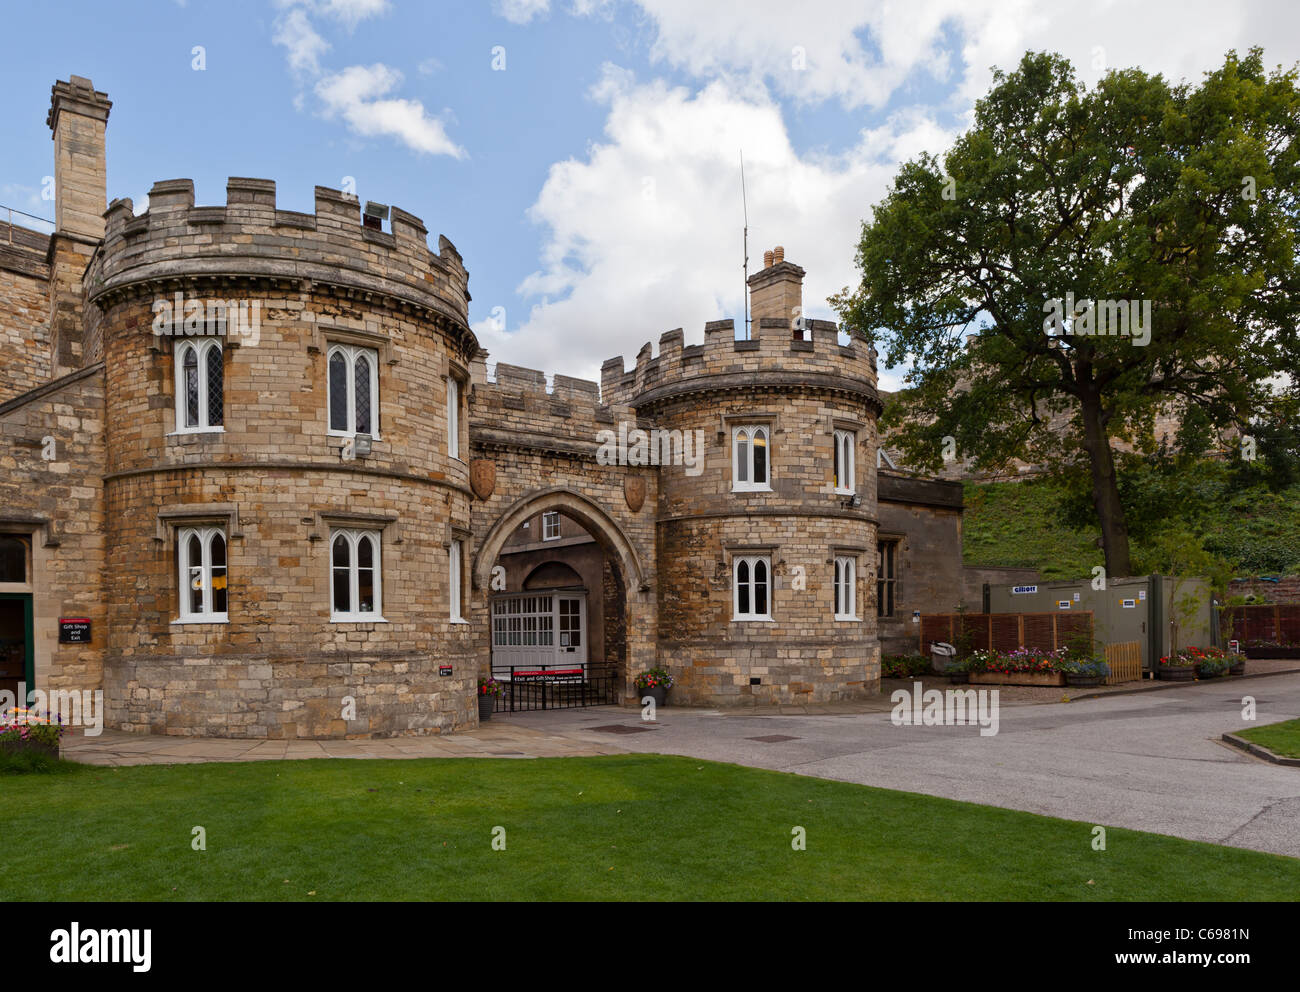 East gate with Gatehouse of the Lincoln castle - Lincoln, Lincolnshire, UK, Europe Stock Photo